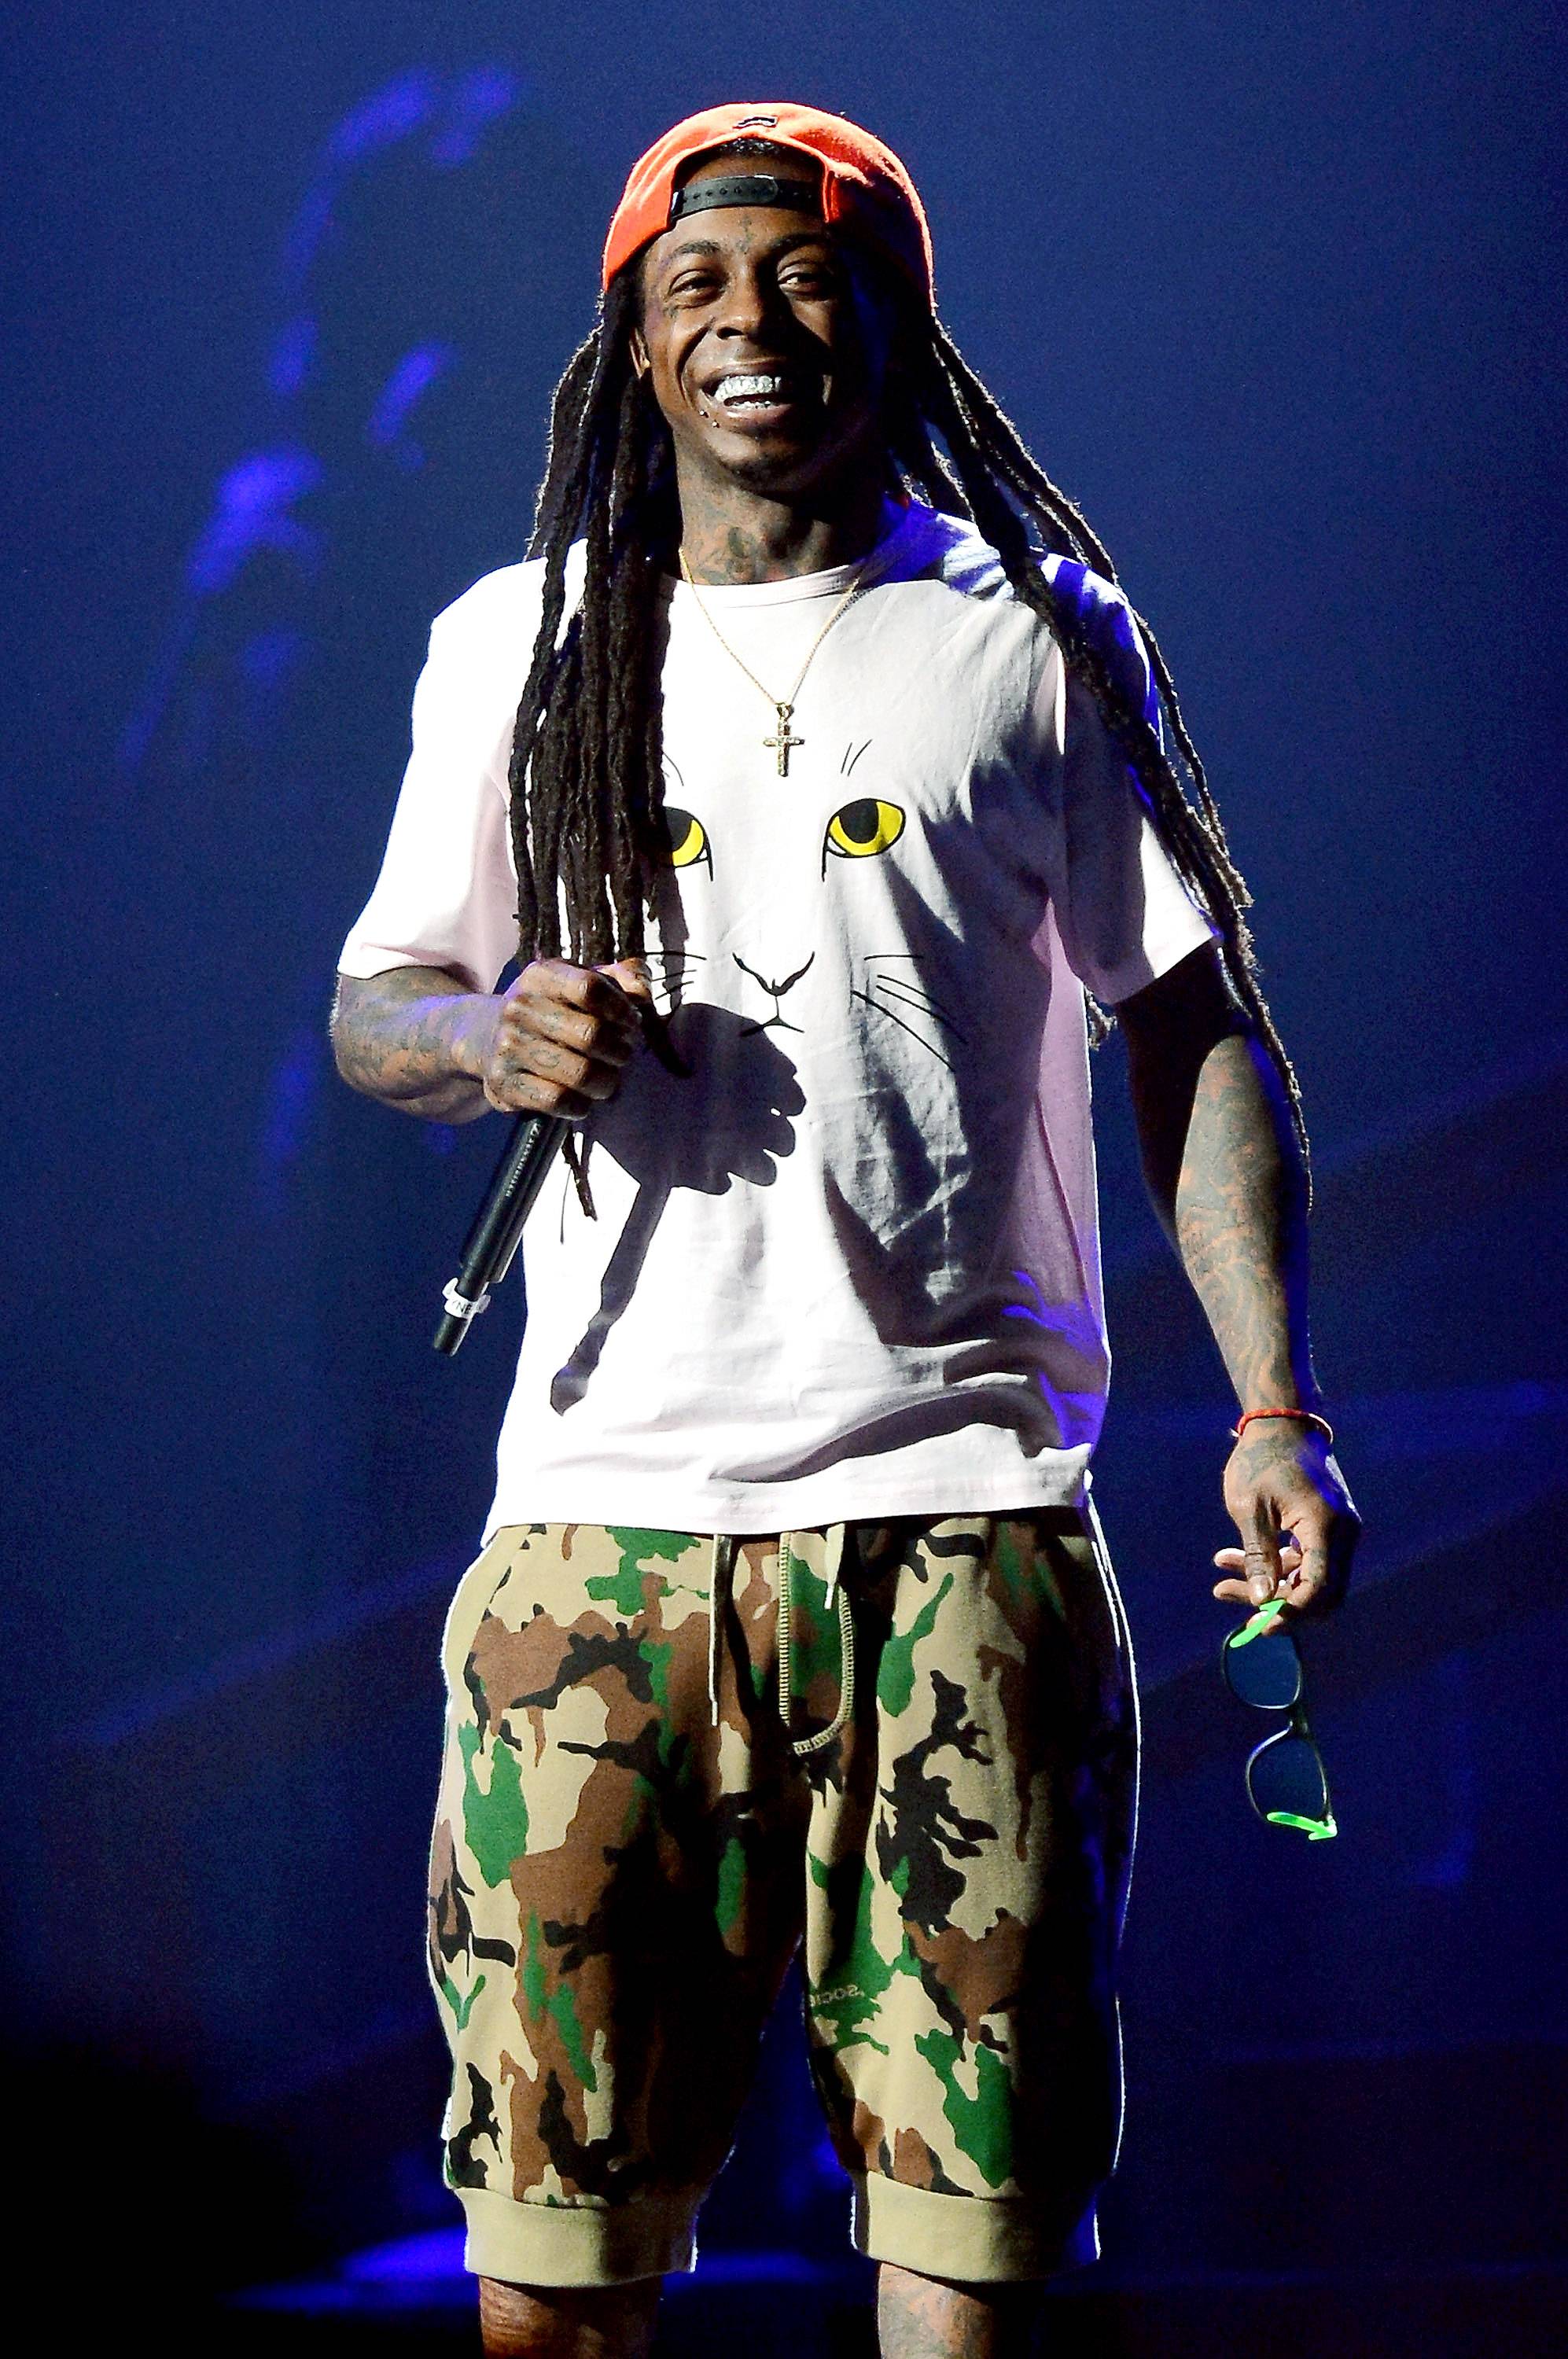 Lil Wayne May Be Making Moves to Reality TV&nbsp; - Lil Wayne is reportedly joining the reality TV scene. The Young Money performer recently spoke with Dr. Miami and Stephanie Acevedo claimed she is working with the rapper on a new VH1 series.&nbsp;“It’s basically us coming together as artists, as a family,” stated Acevedo. “Wayne’s going to be our mentor.”We can't wait to check this out out!&nbsp;(Photo: Ethan Miller/Getty Images)